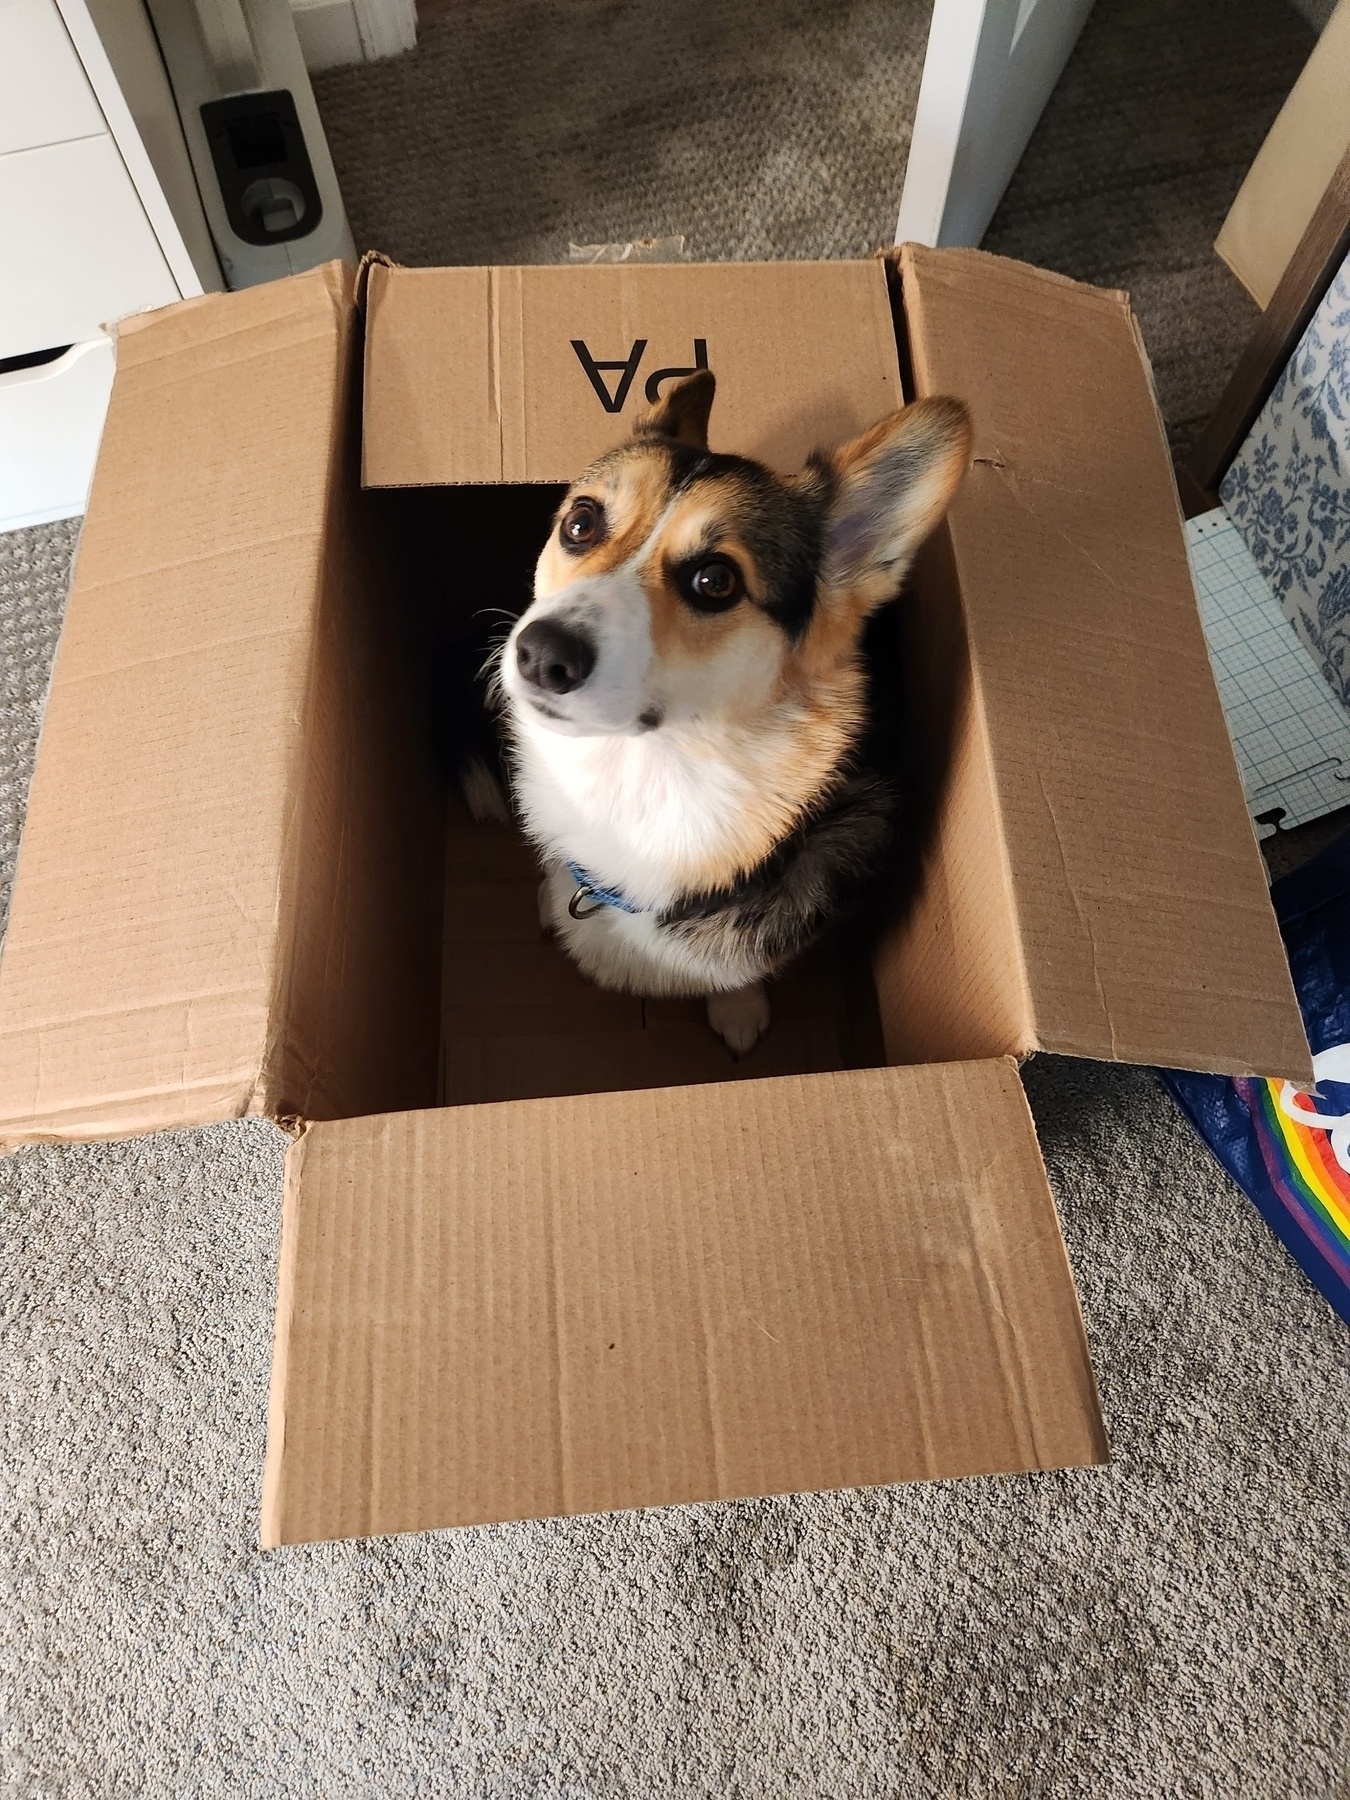 Tricolor corgi sitting in an empty open cardboard box looking up at the camera with big eyes